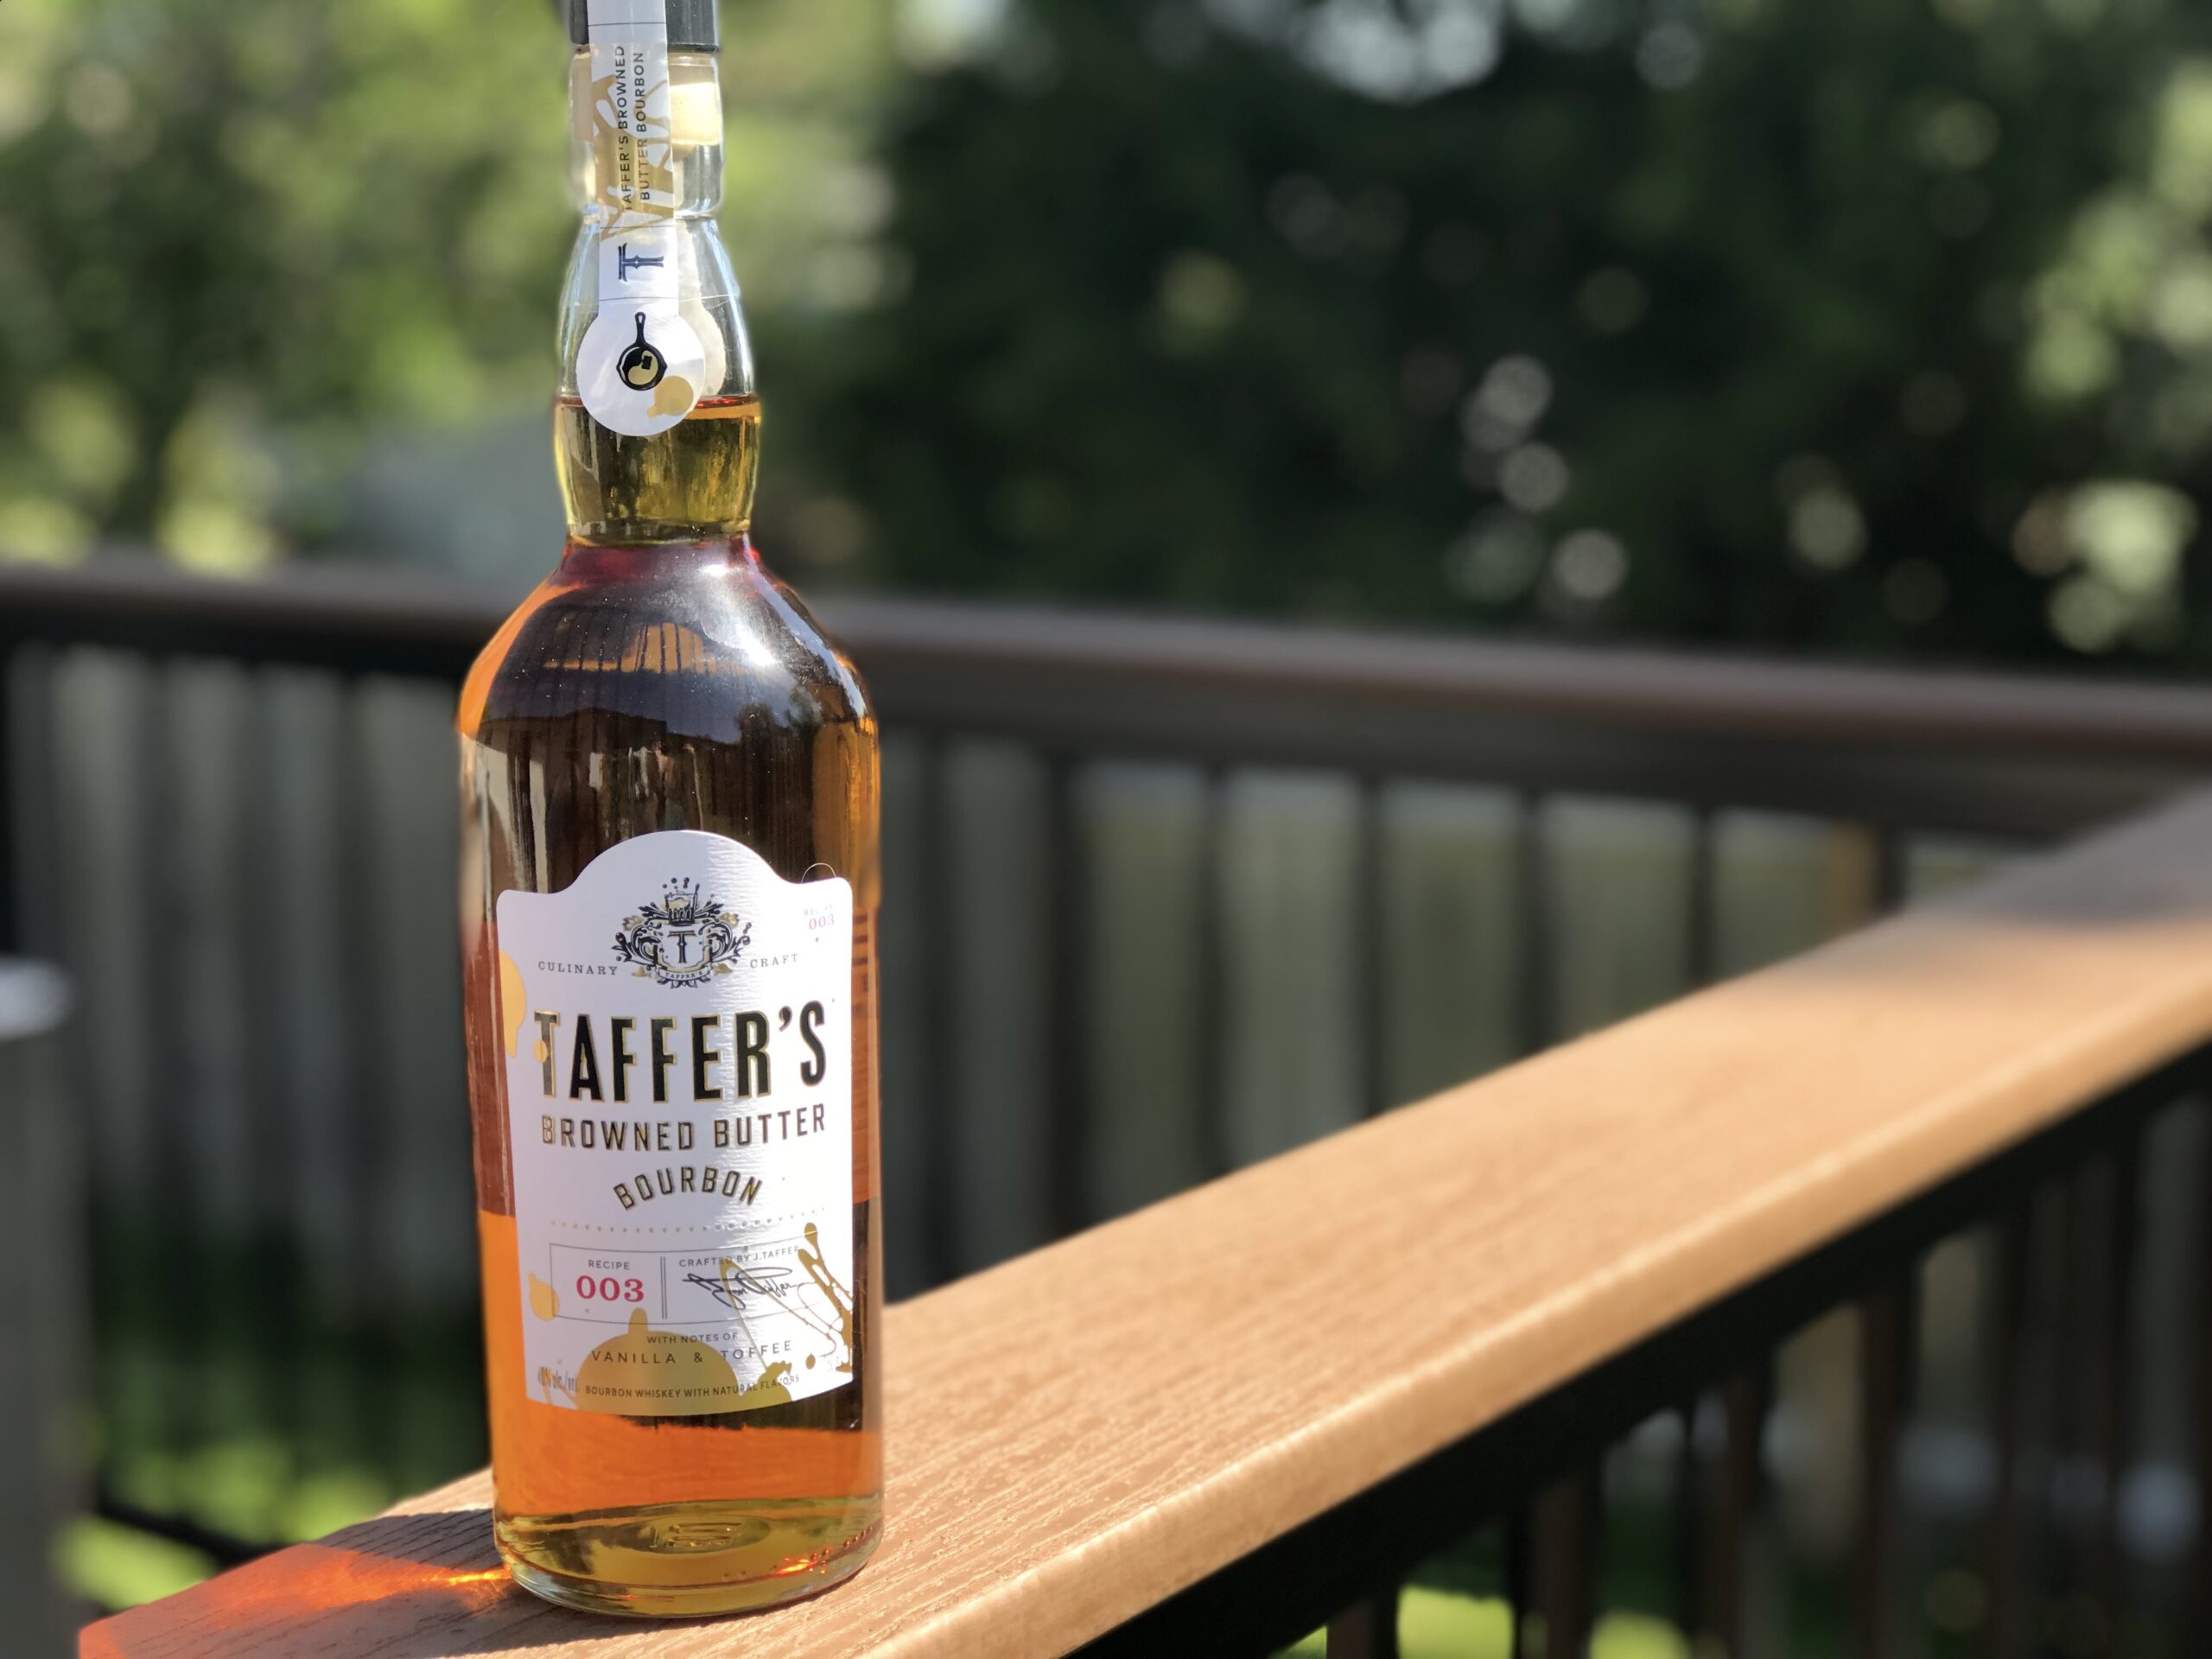 Taffer’s Browned Butter Bourbon review